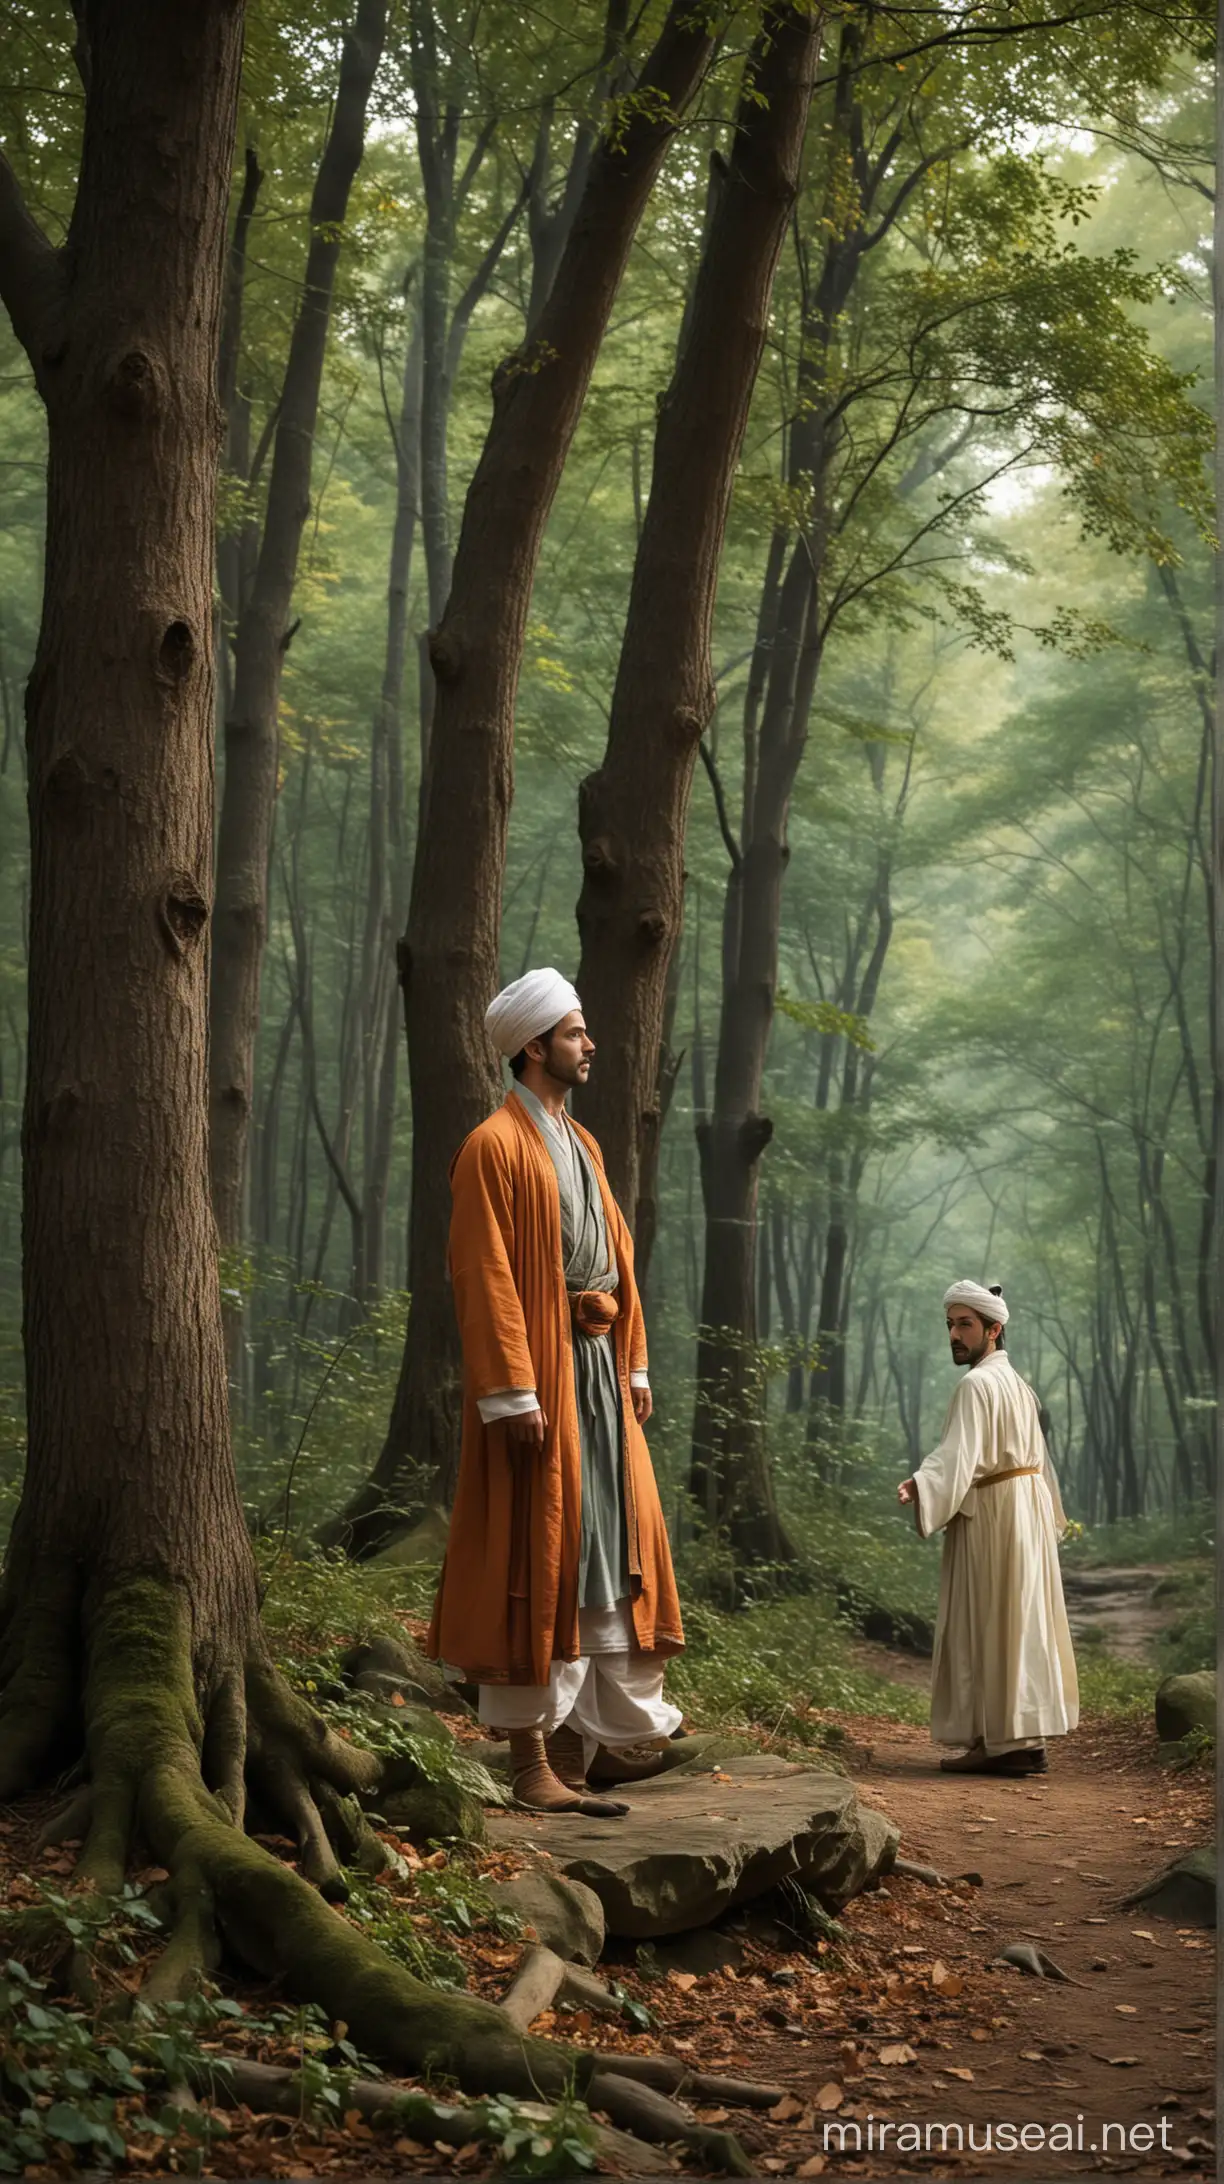 The Prince's Journey into the Woods: A forest scenery with a young prince in the foreground. He's shedding his royal garments and donning the attire of a dervish. Beside him, a dervish figure becomes apparent, symbolizing his departure from princely life into a spiritual journey.

